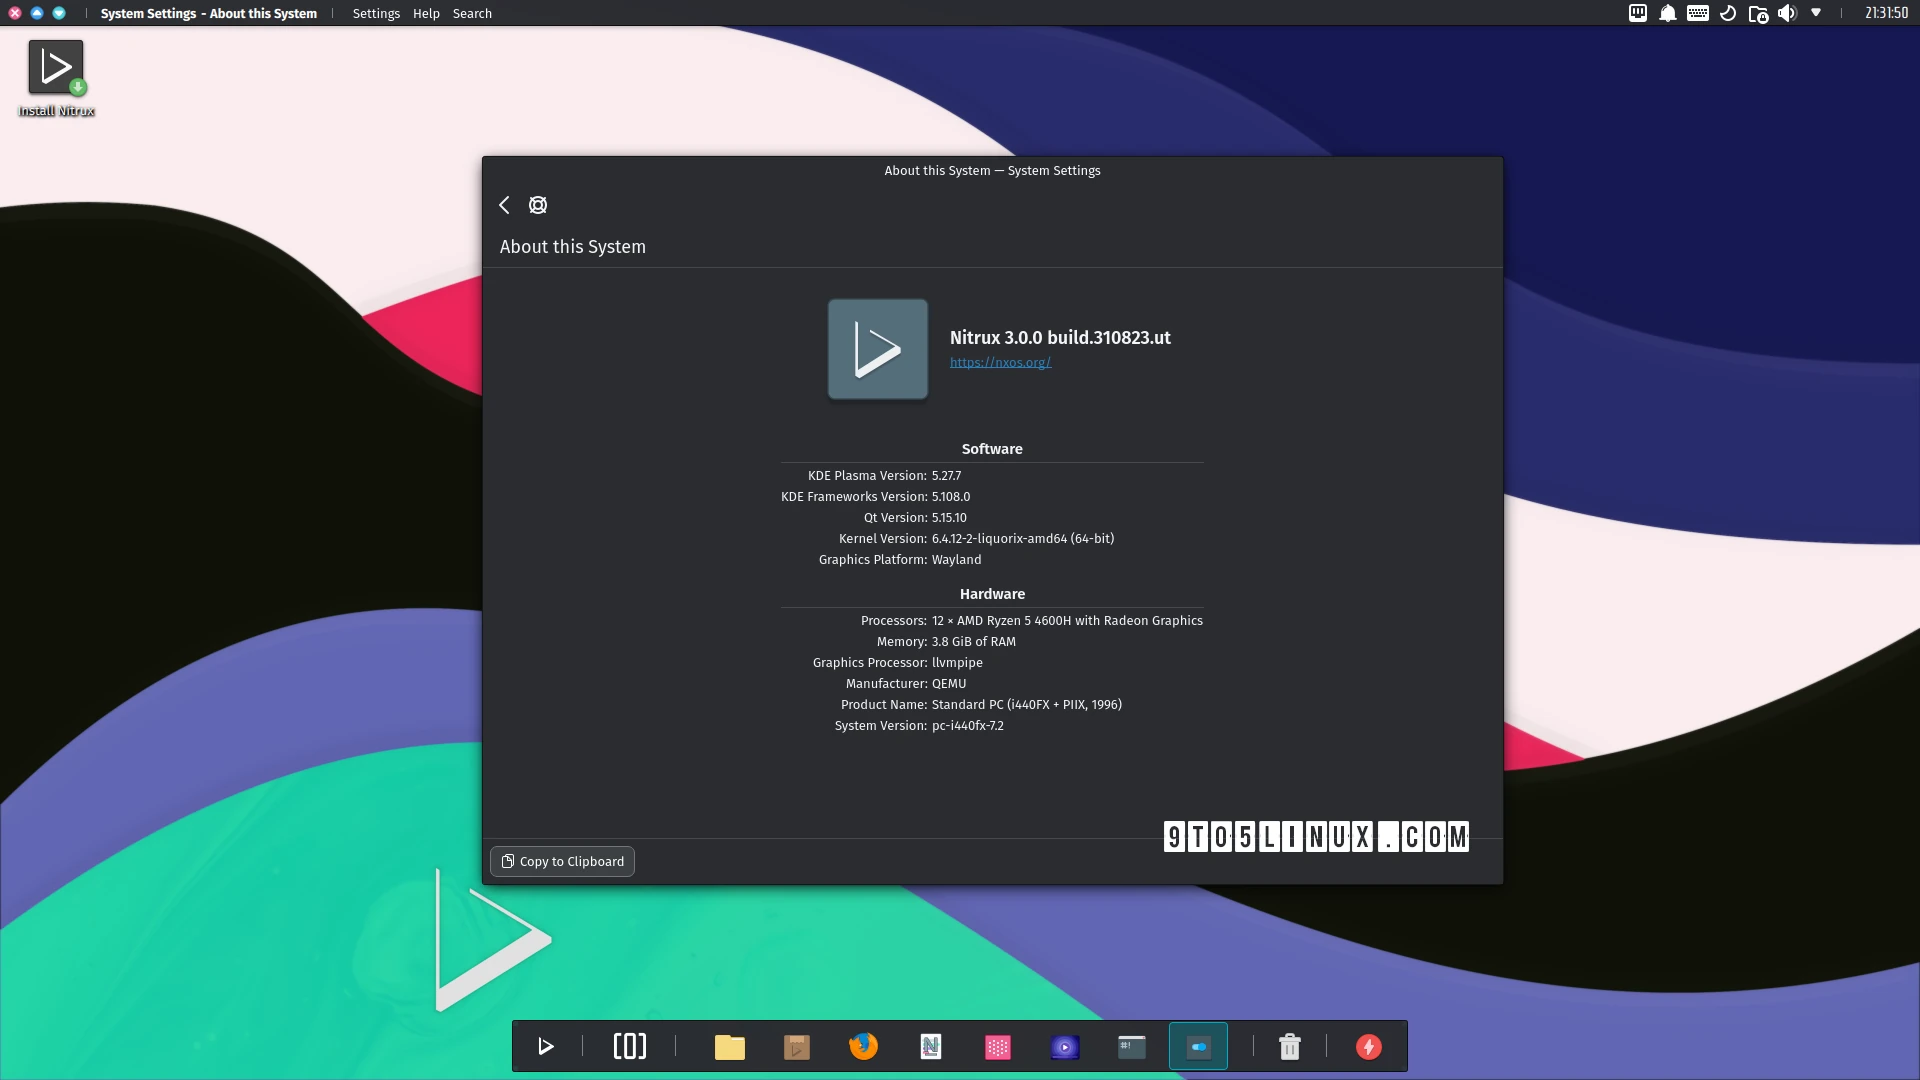 Nitrux 3.0 Arrives with Improvements to Boot, Installation, and Upgrade